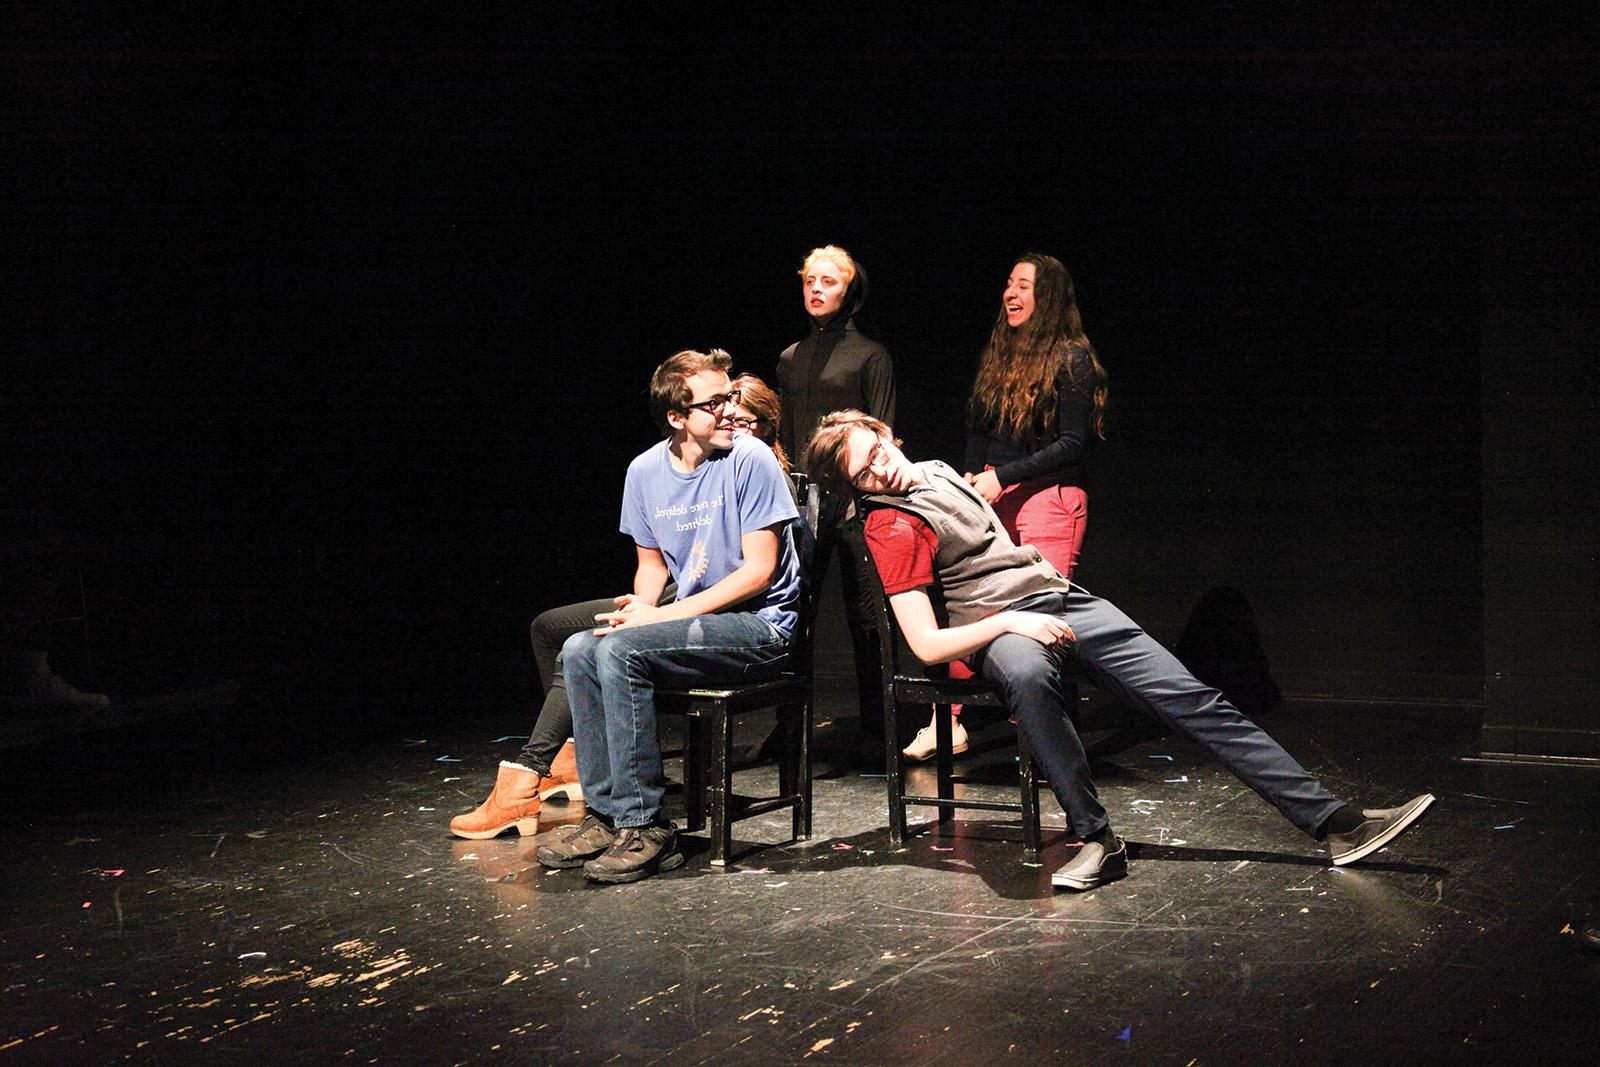 4 students on stage, 2 seated, 2 standing behind